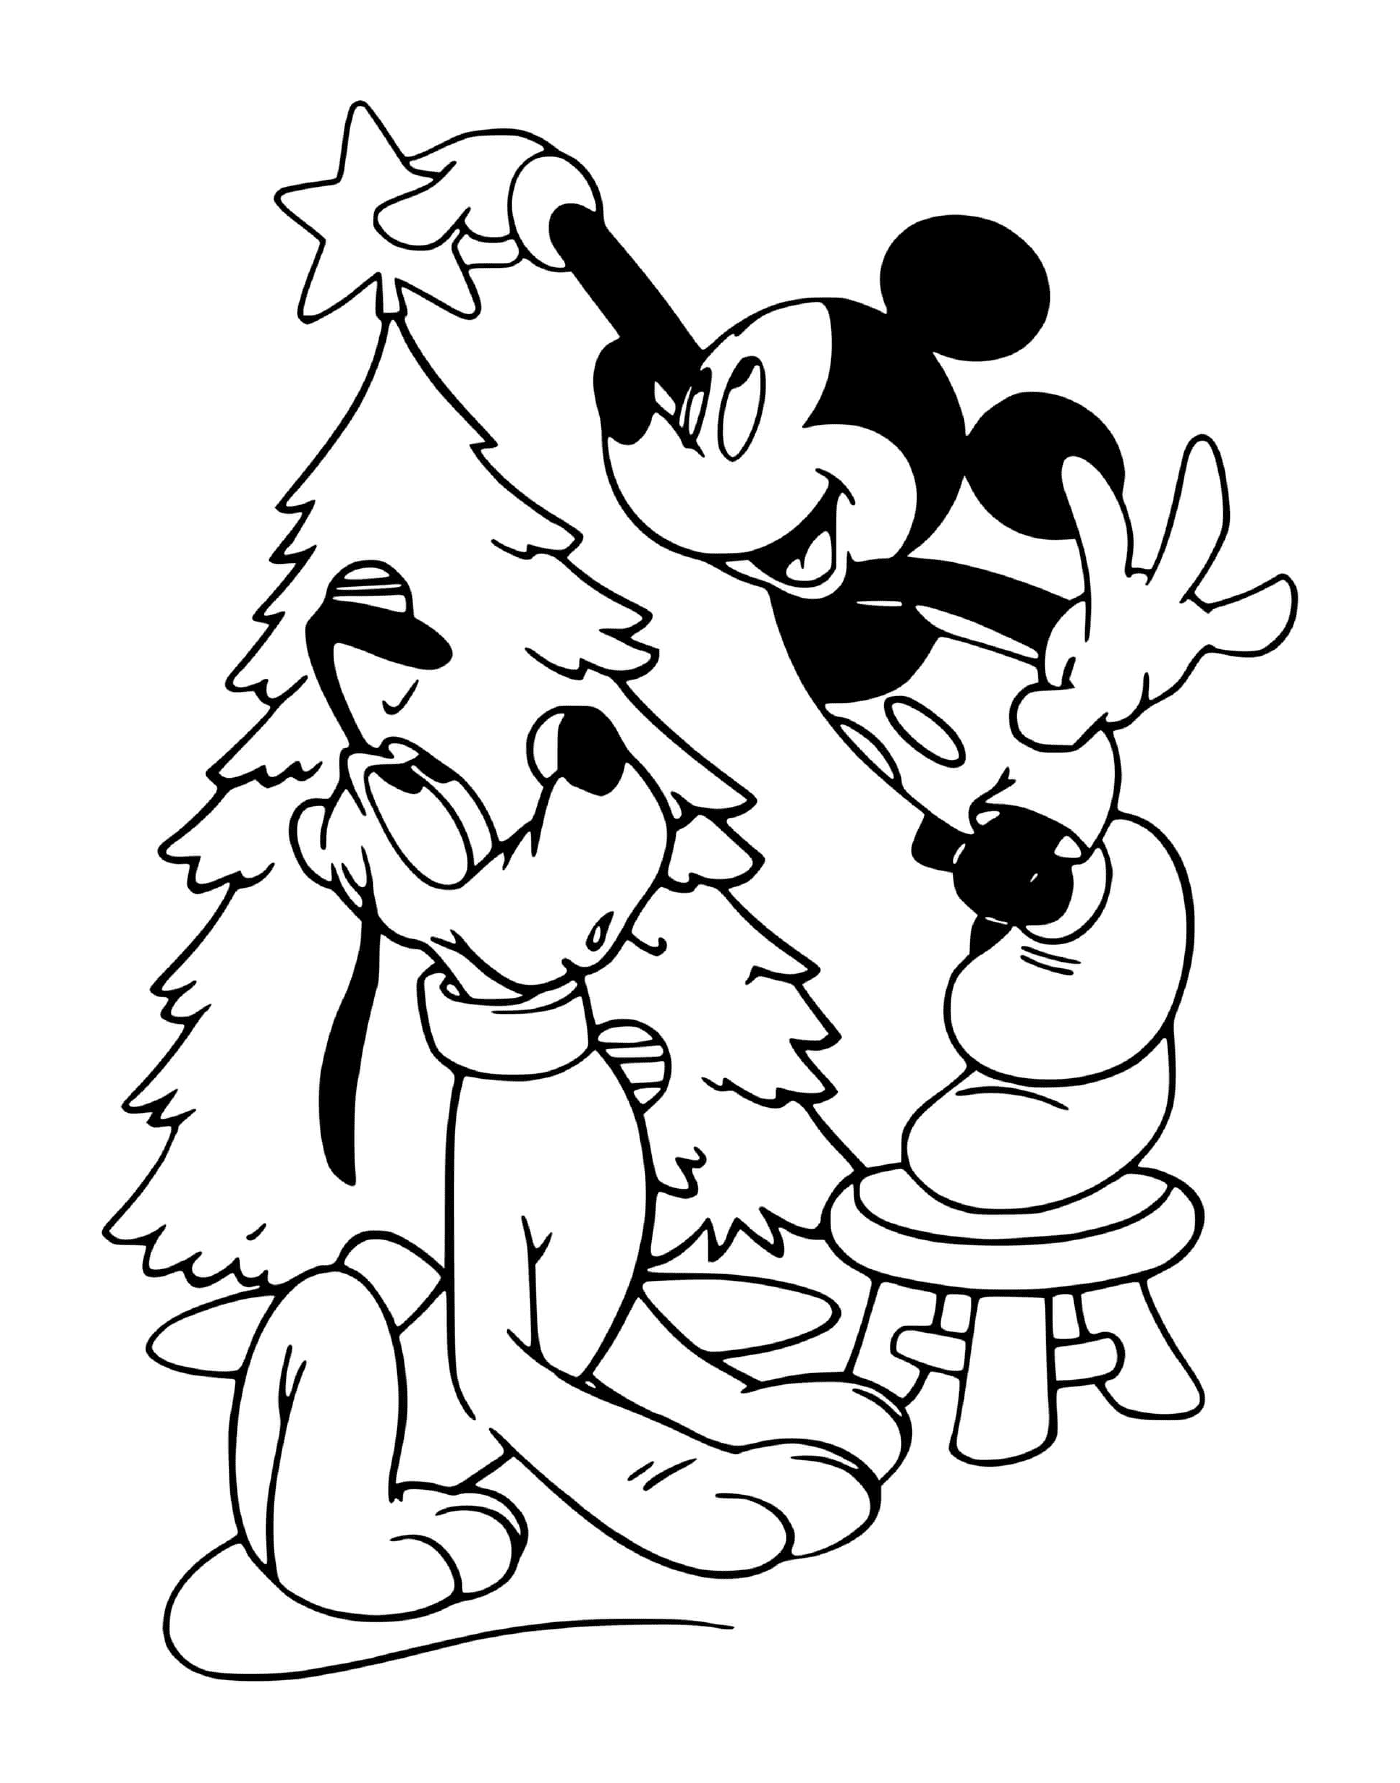  Mickey and Pluto decorate the tree 